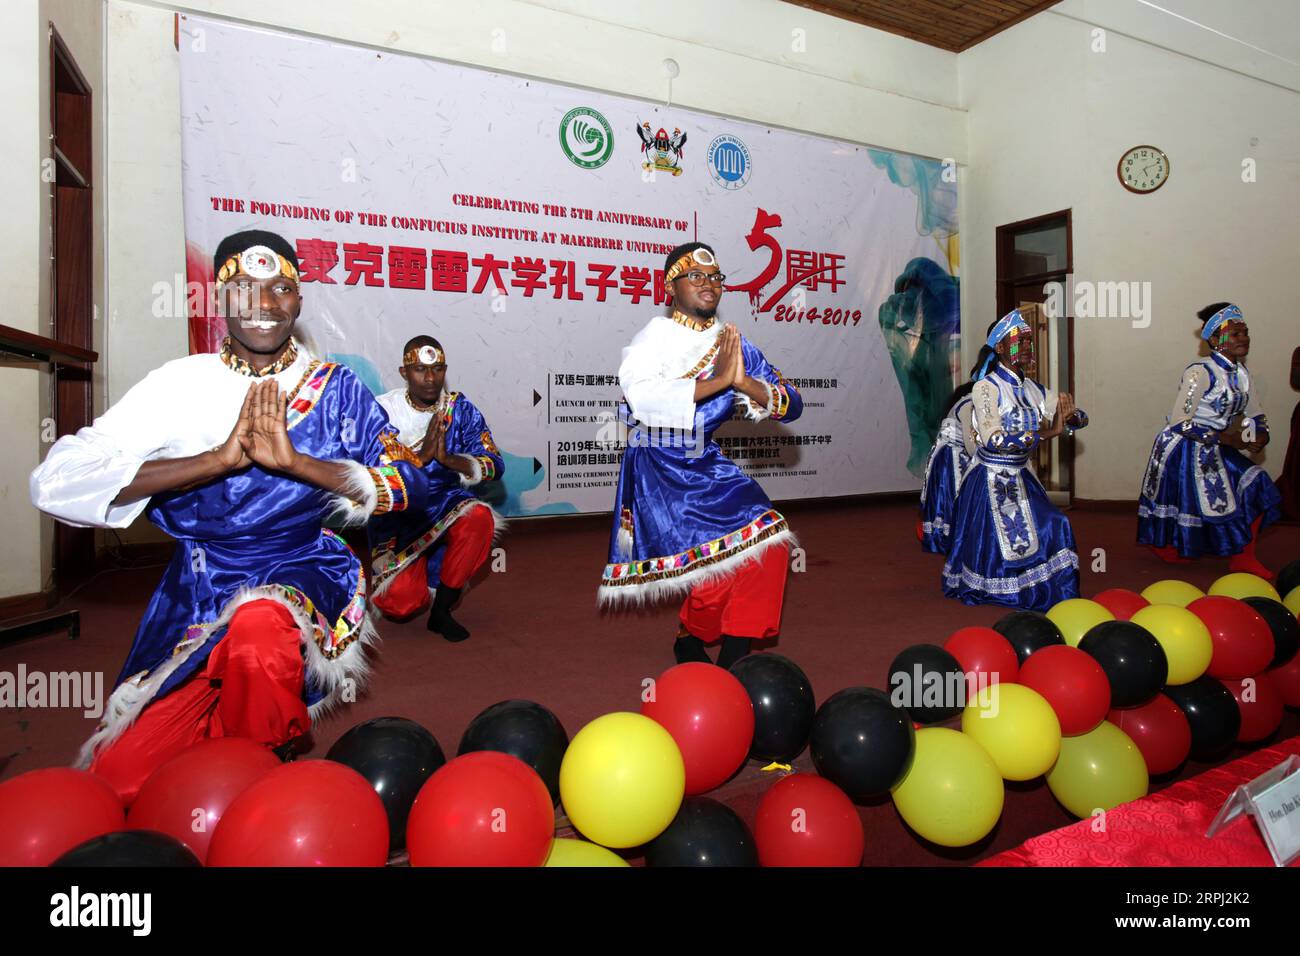 191124 -- KAMPALA, Nov. 24, 2019 Xinhua -- Students of the Confucius Institute at Makerere University perform at an event celebrating the 5th anniversary of the founding of the institute, in Kampala, Uganda, Nov. 23, 2019. Confucius Institute at Makerere University, Uganda s top university, on Saturday celebrated its fifth anniversary. The institution, as the nexus of Chinese language teaching, is playing a major role for cultural exchange between Uganda and China. Photo by Hajarah Nalwadda/Xinhua UGANDA-KAMPALA-MAKERERE UNIVERSITY-CONFUCIUS INSTITUTE-ANNIVERSARY PUBLICATIONxNOTxINxCHN Stock Photo